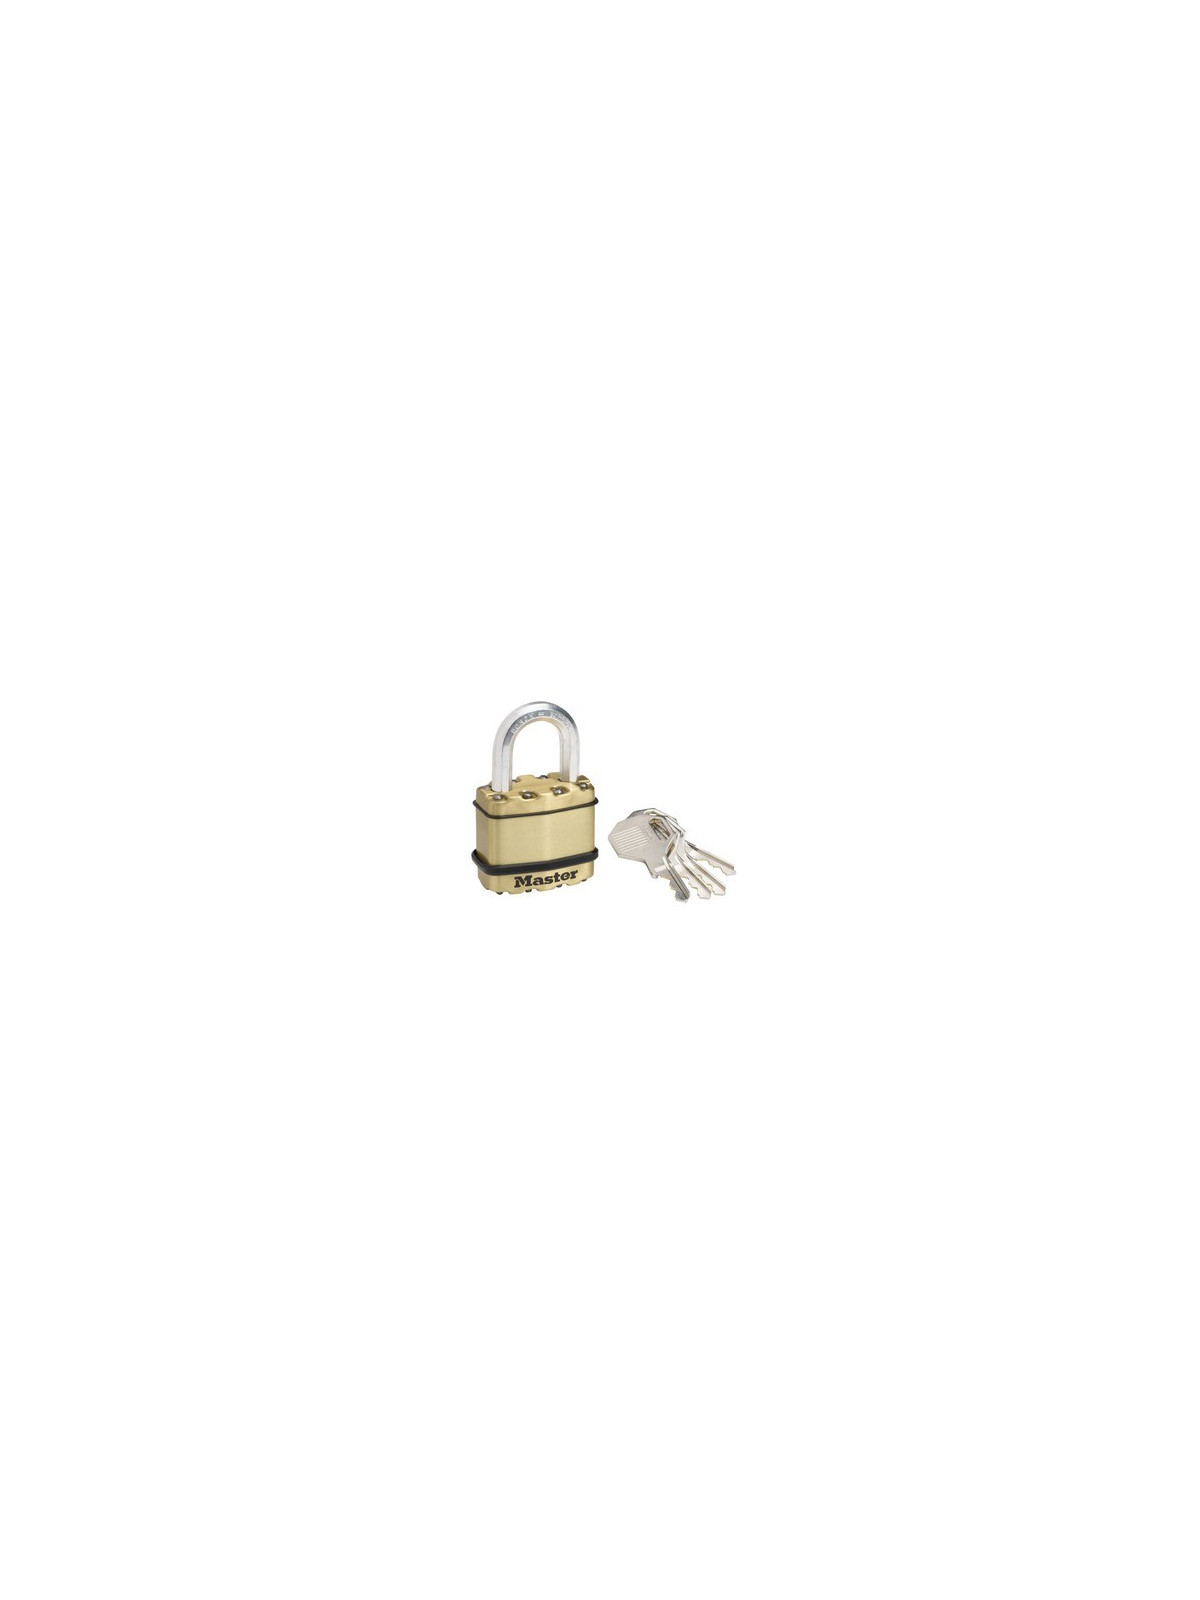 Cadenas Master Lock Excell M1BEURD corps anti-corrosion